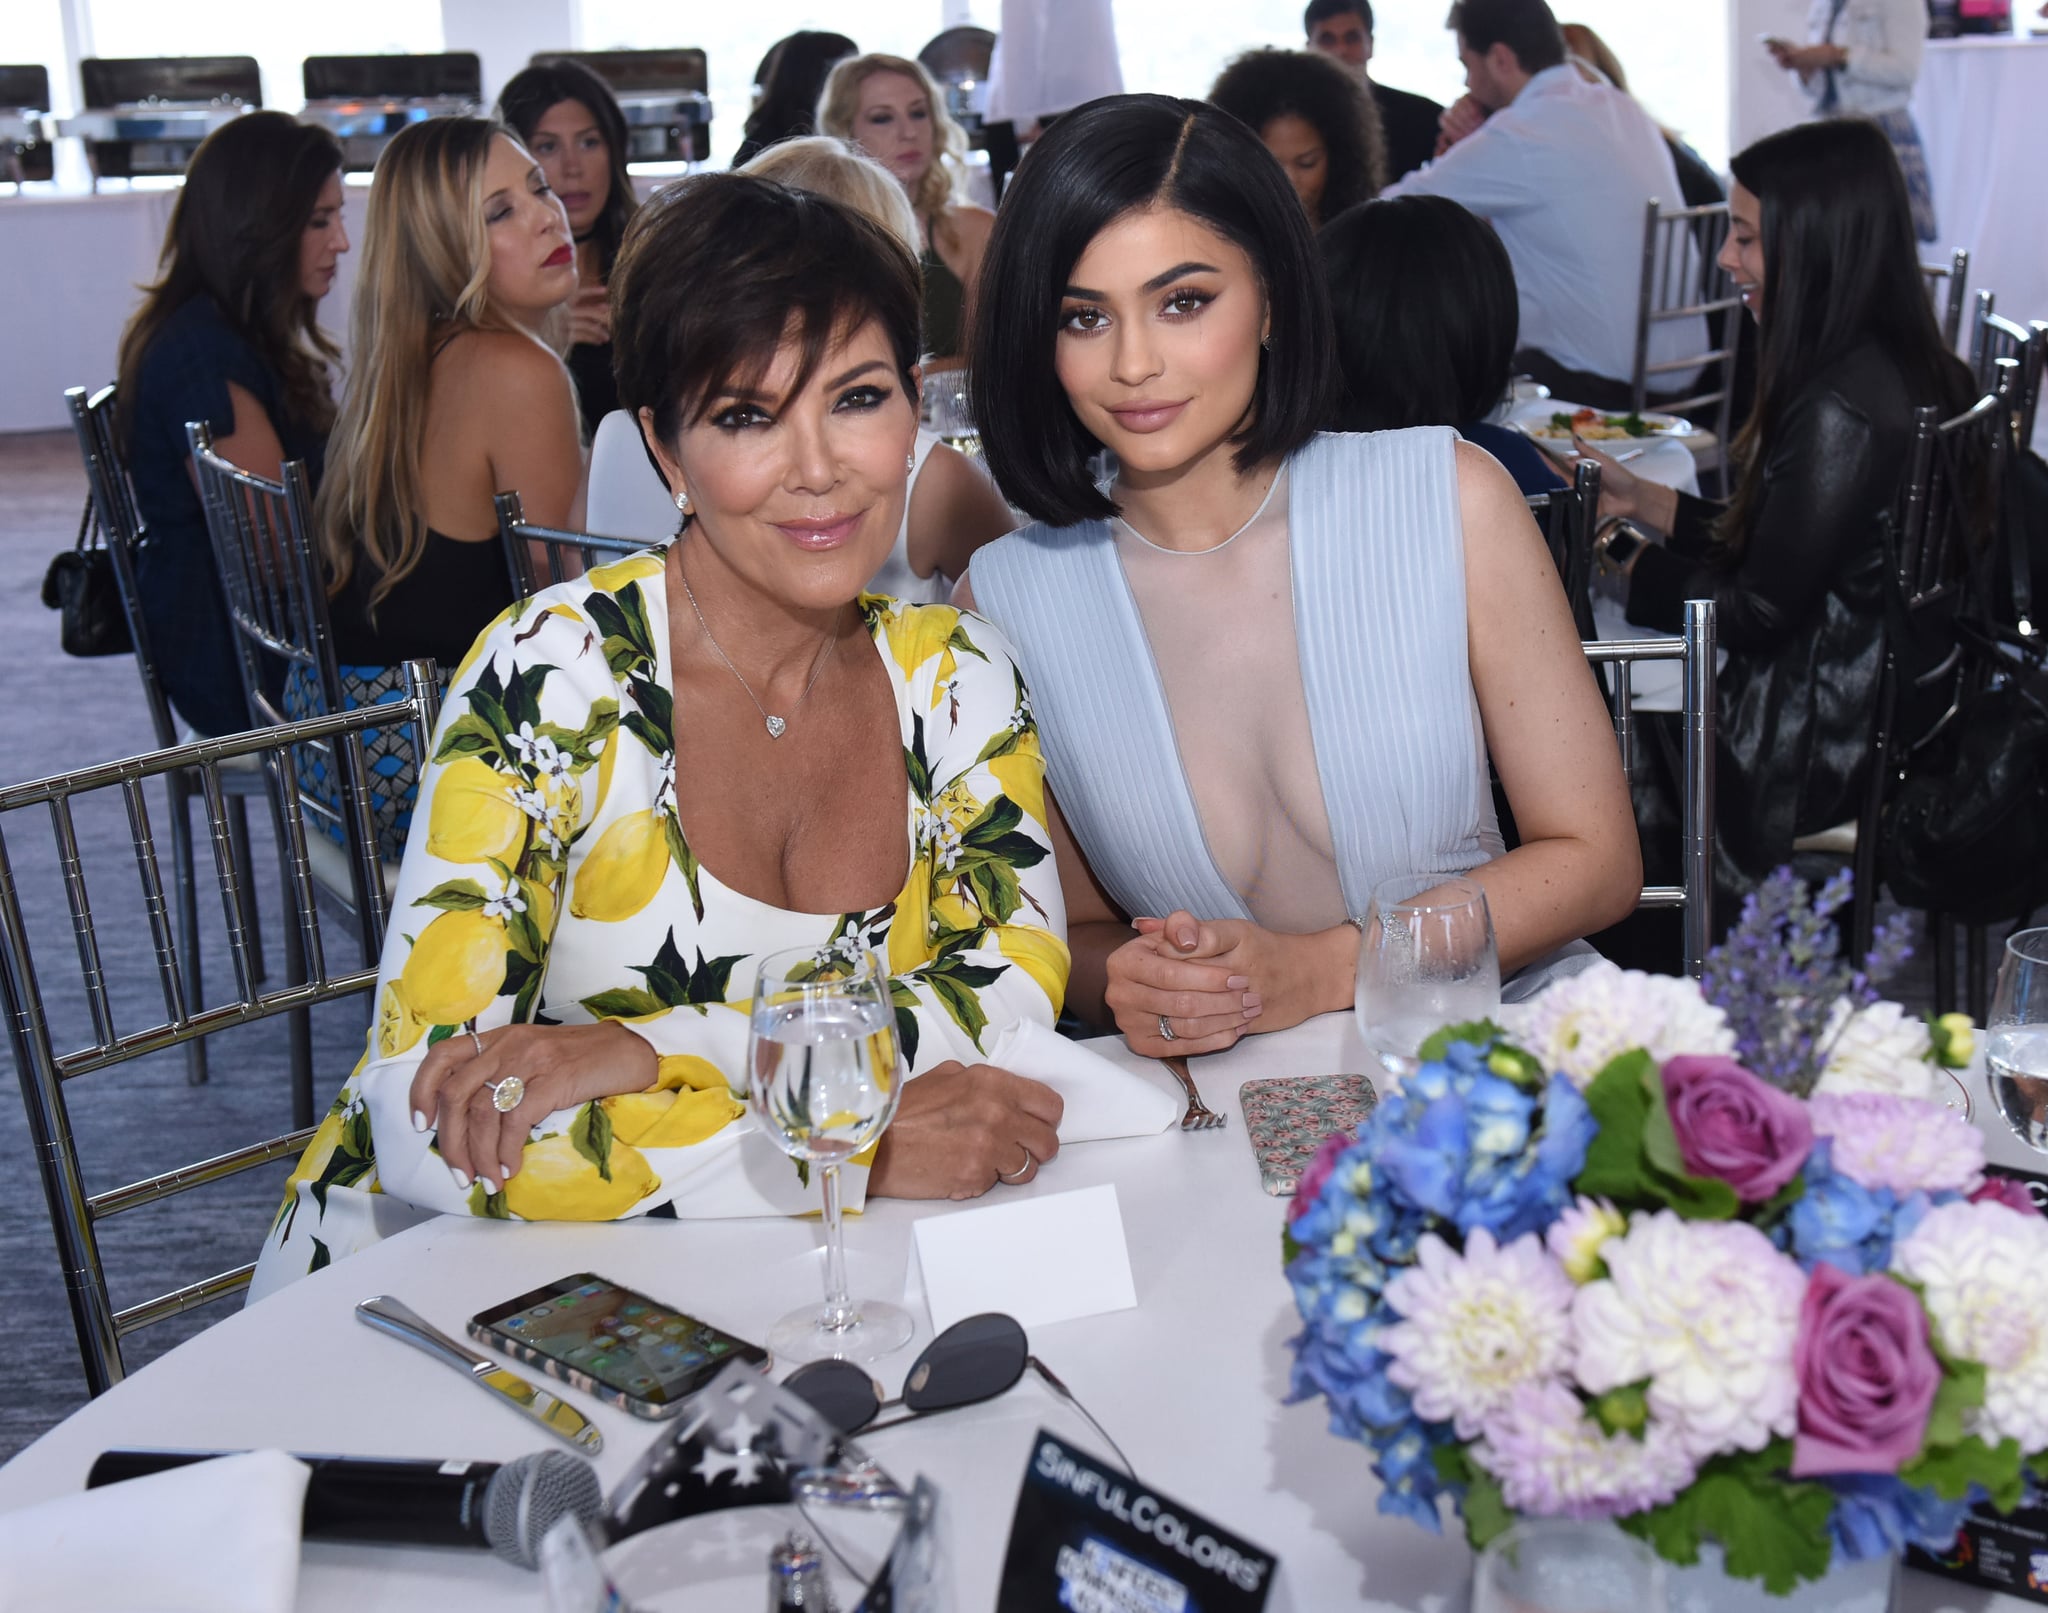 LOS ANGELES, CA - JULY 14:  (EXCLUSIVE COVERAGE) Kris Jenner and Kylie Jenner attend SinfulColours and Kylie Jenner Announce charitybuzz.com Auction for Anti Bullying on July 14, 2016 in Los Angeles, California.  (Photo by Vivien Killilea/Getty Images for SinfulColours)